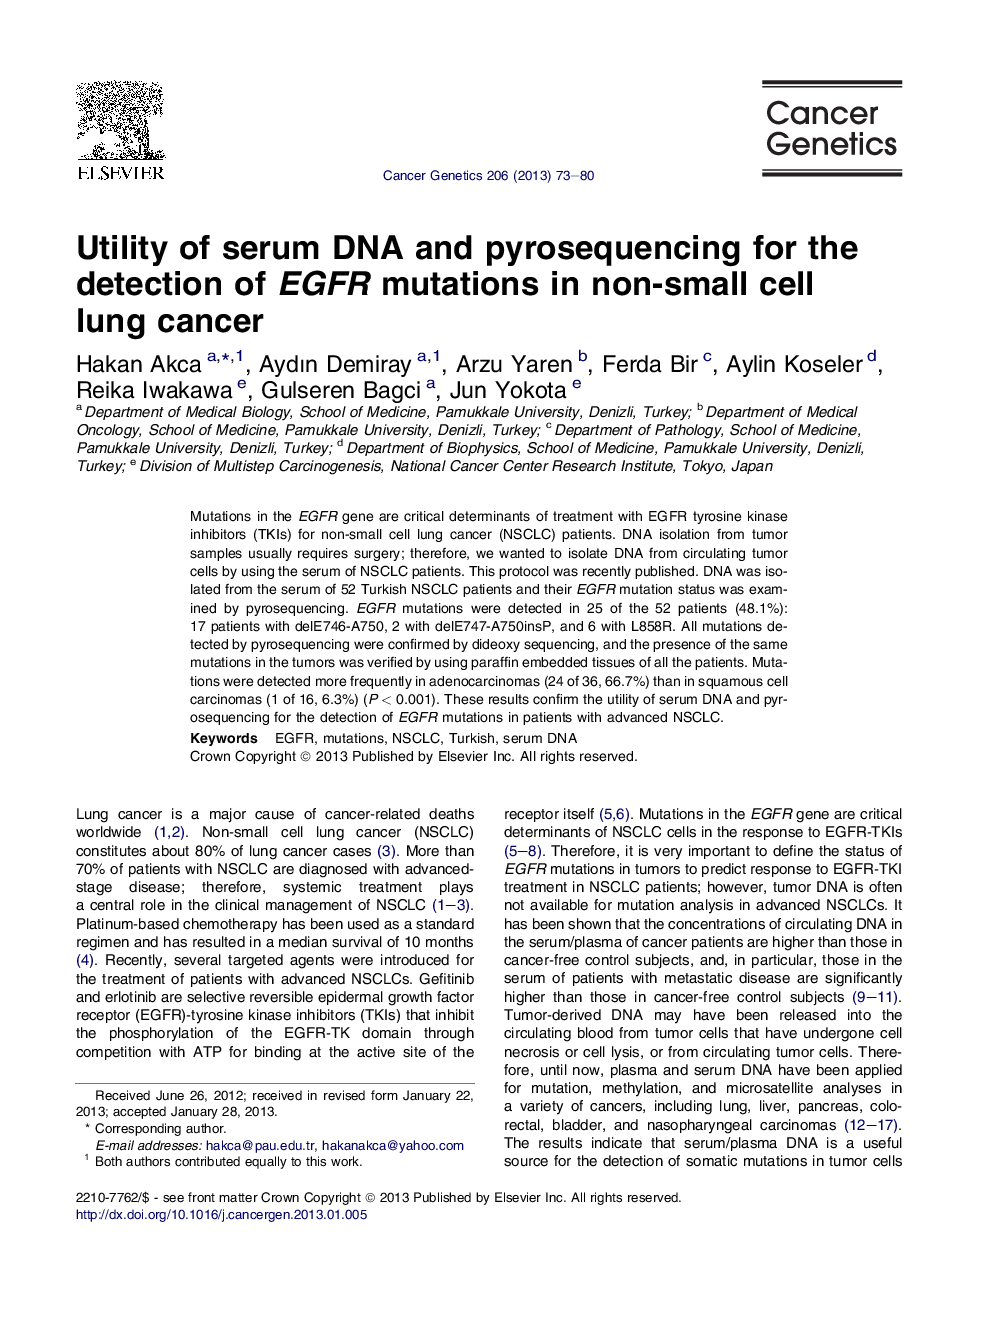 Utility of serum DNA and pyrosequencing for the detection of EGFR mutations in non-small cell lung cancer